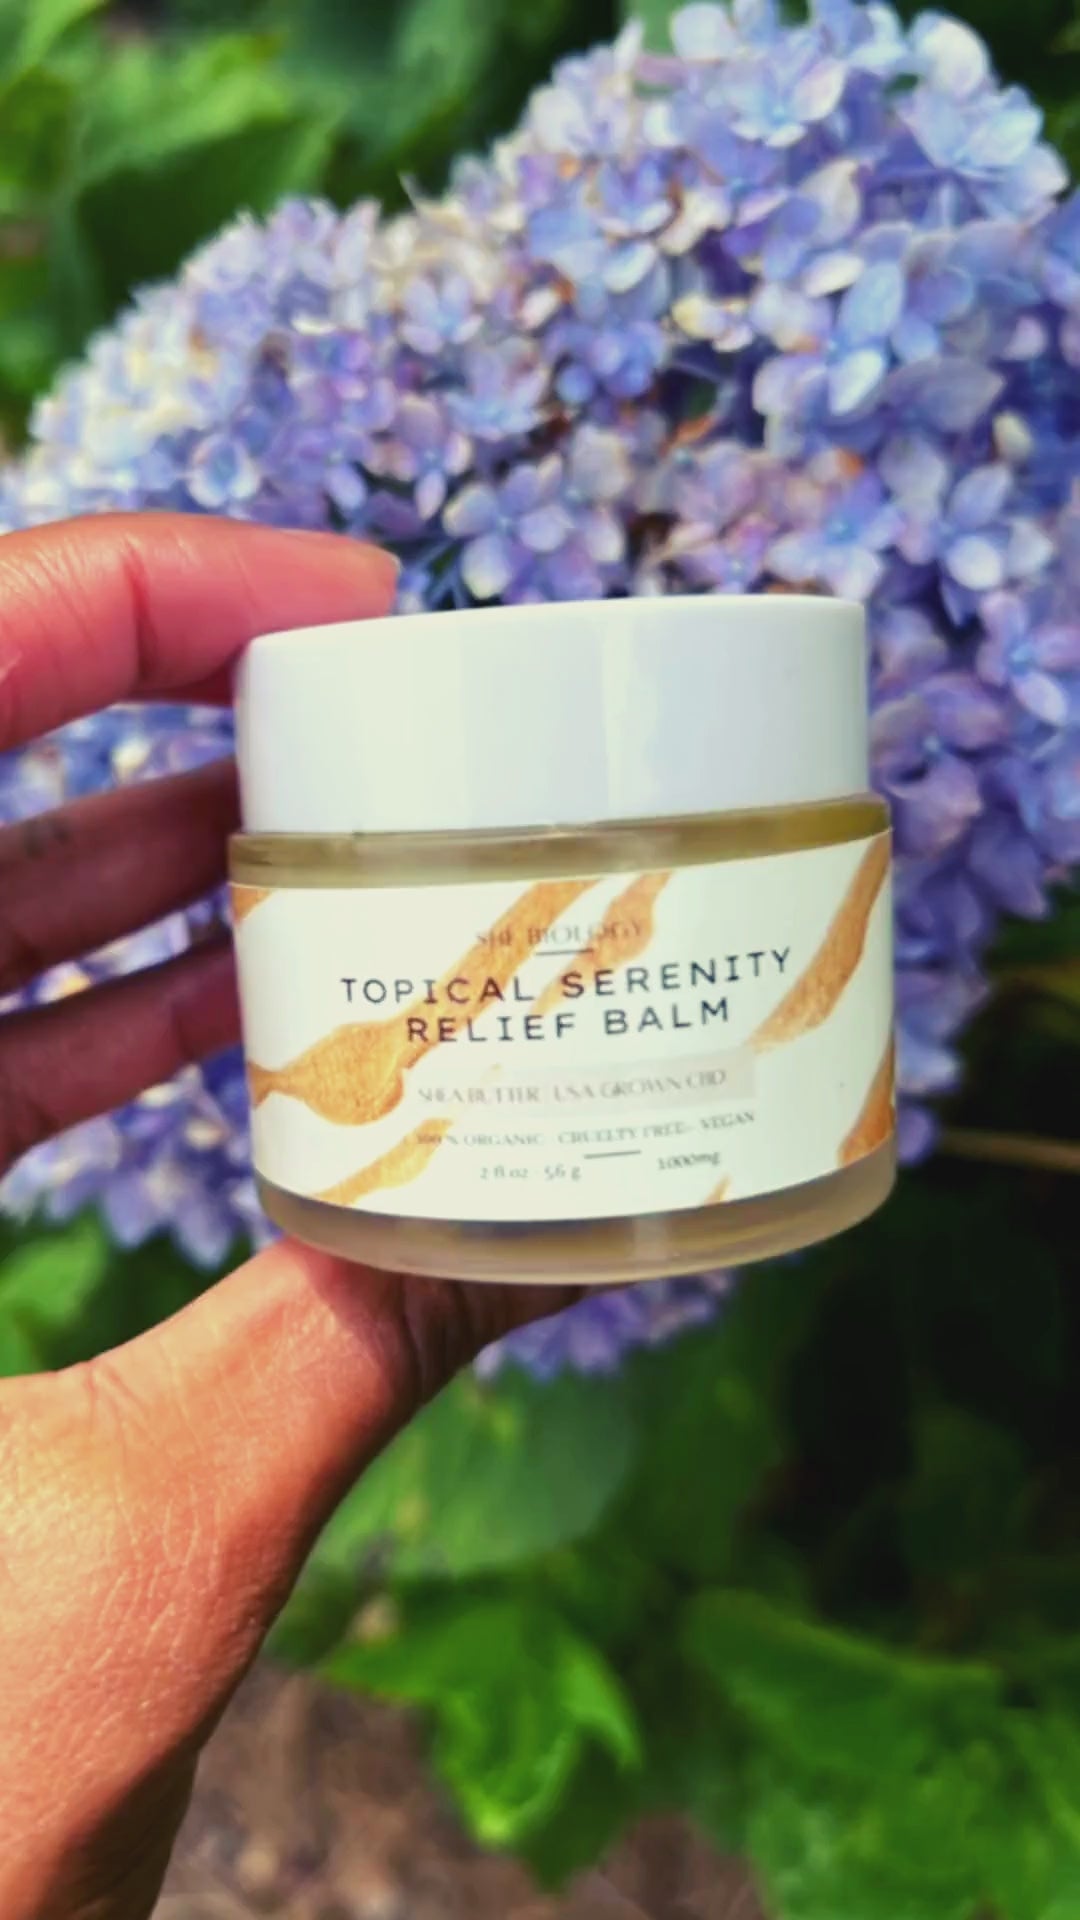 Topical Serenity Relief Balm